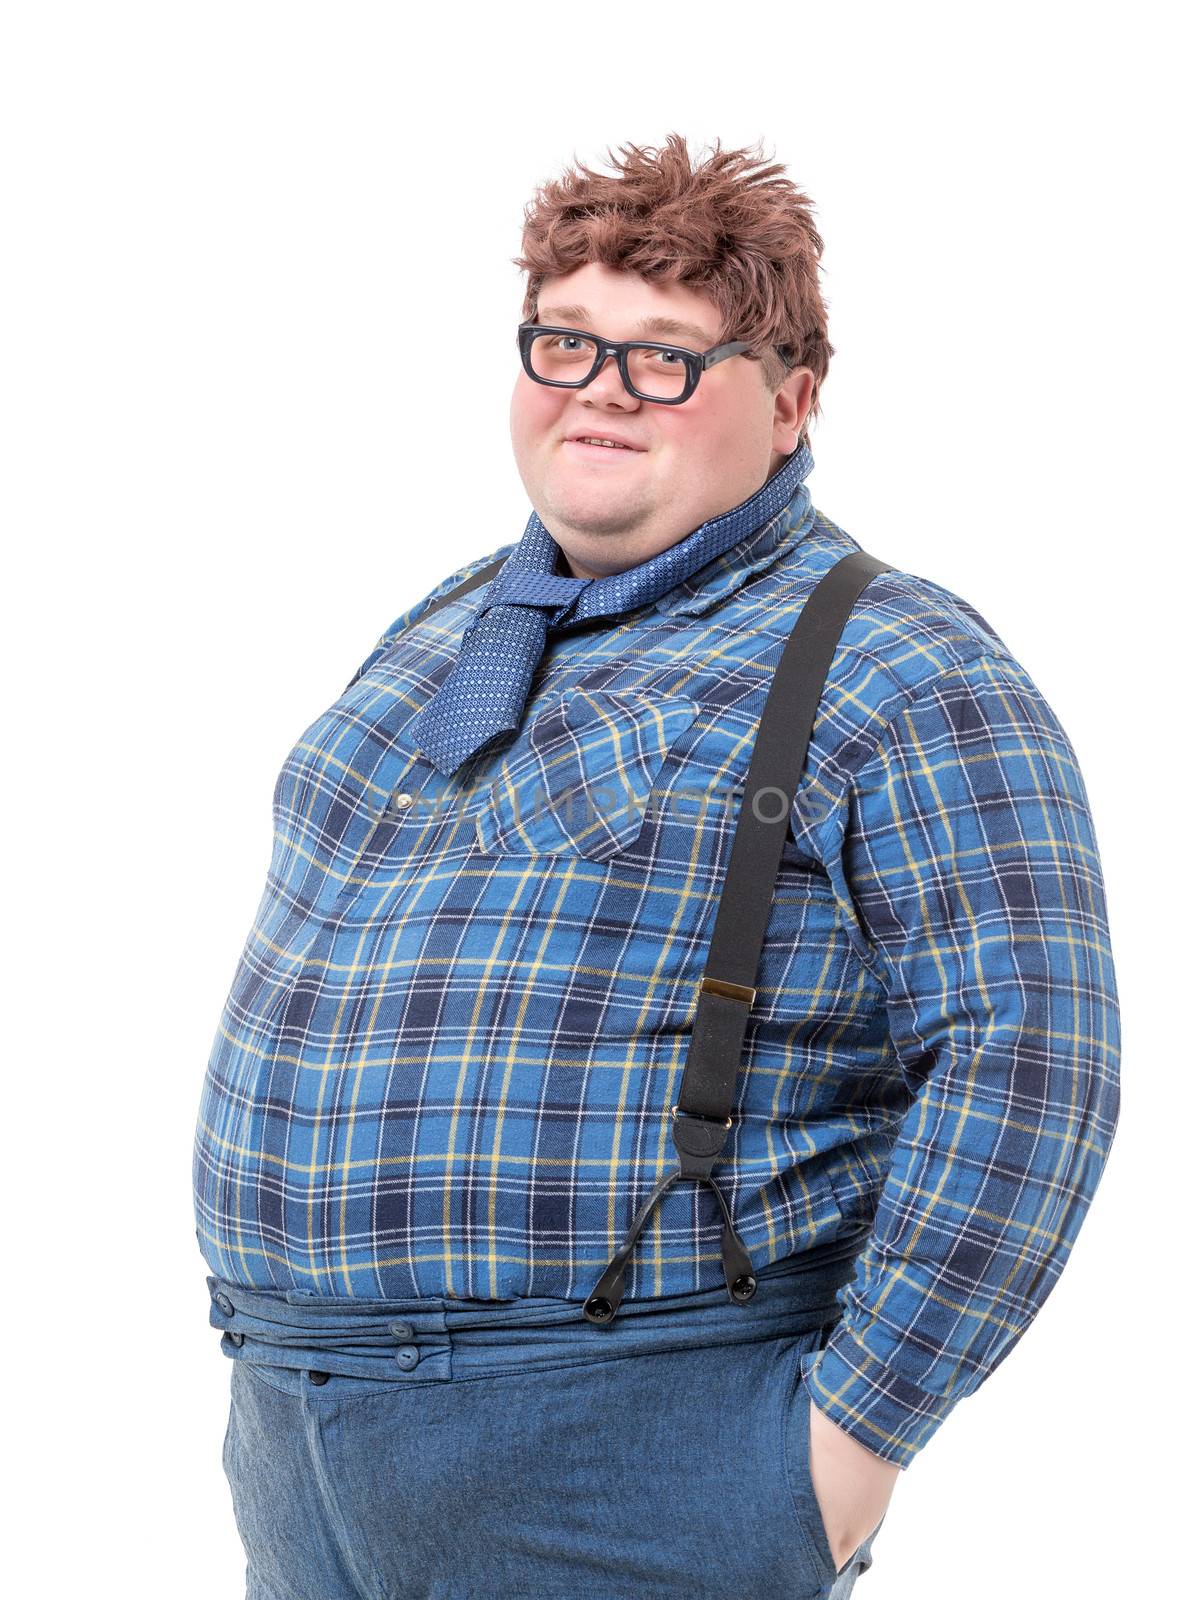 Overweight obese young man by Discovod